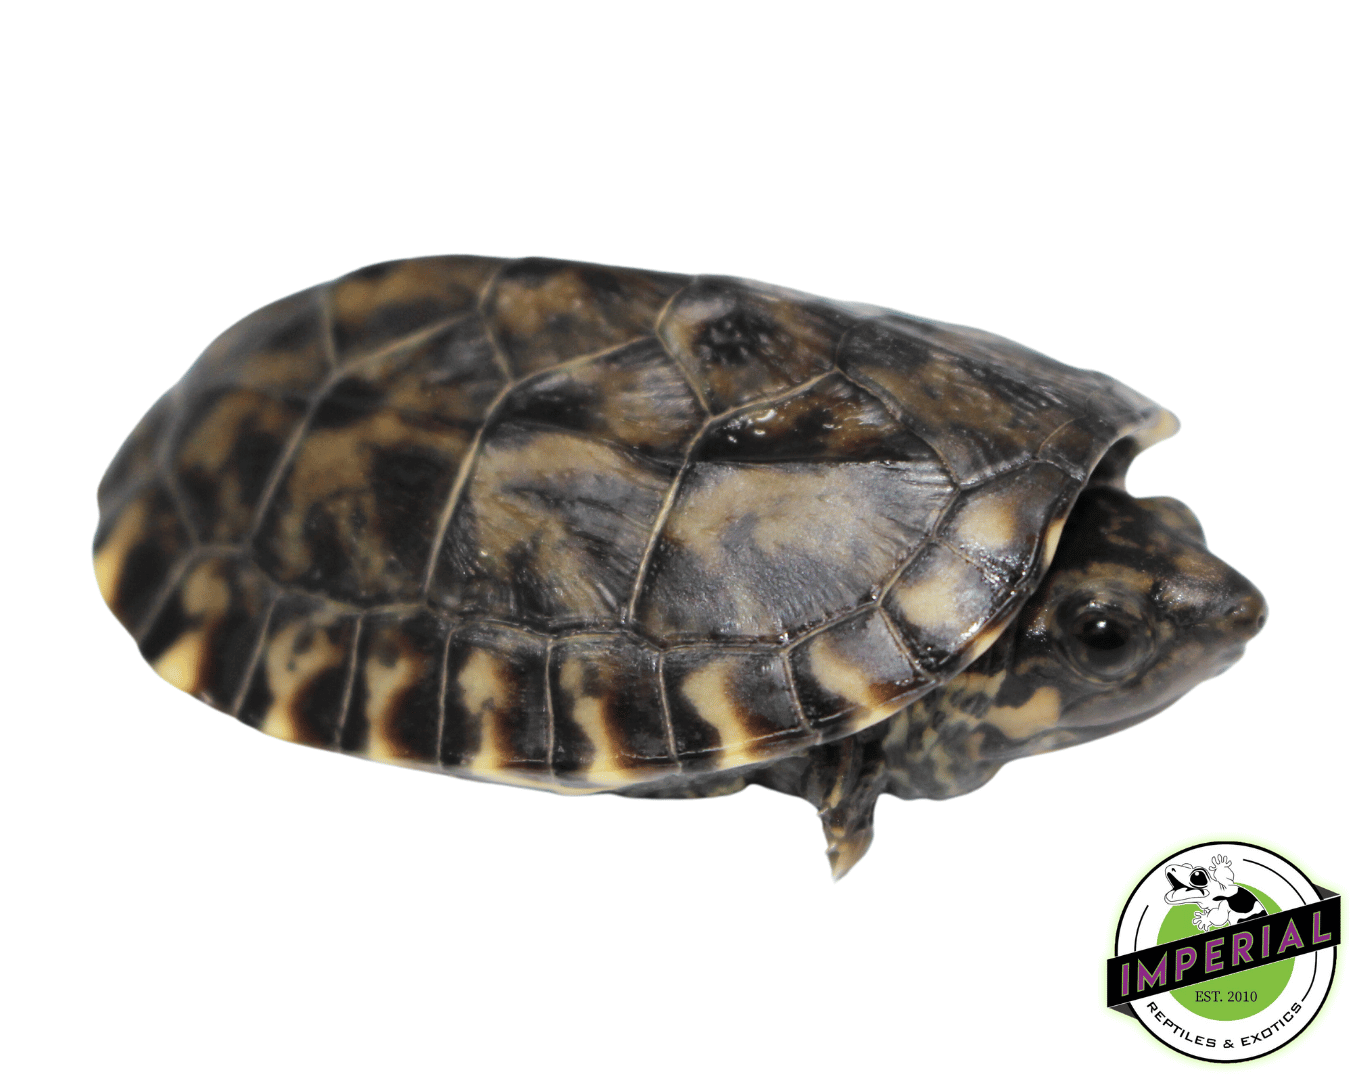 giant mexican musk turtle for sale, buy reptiles online